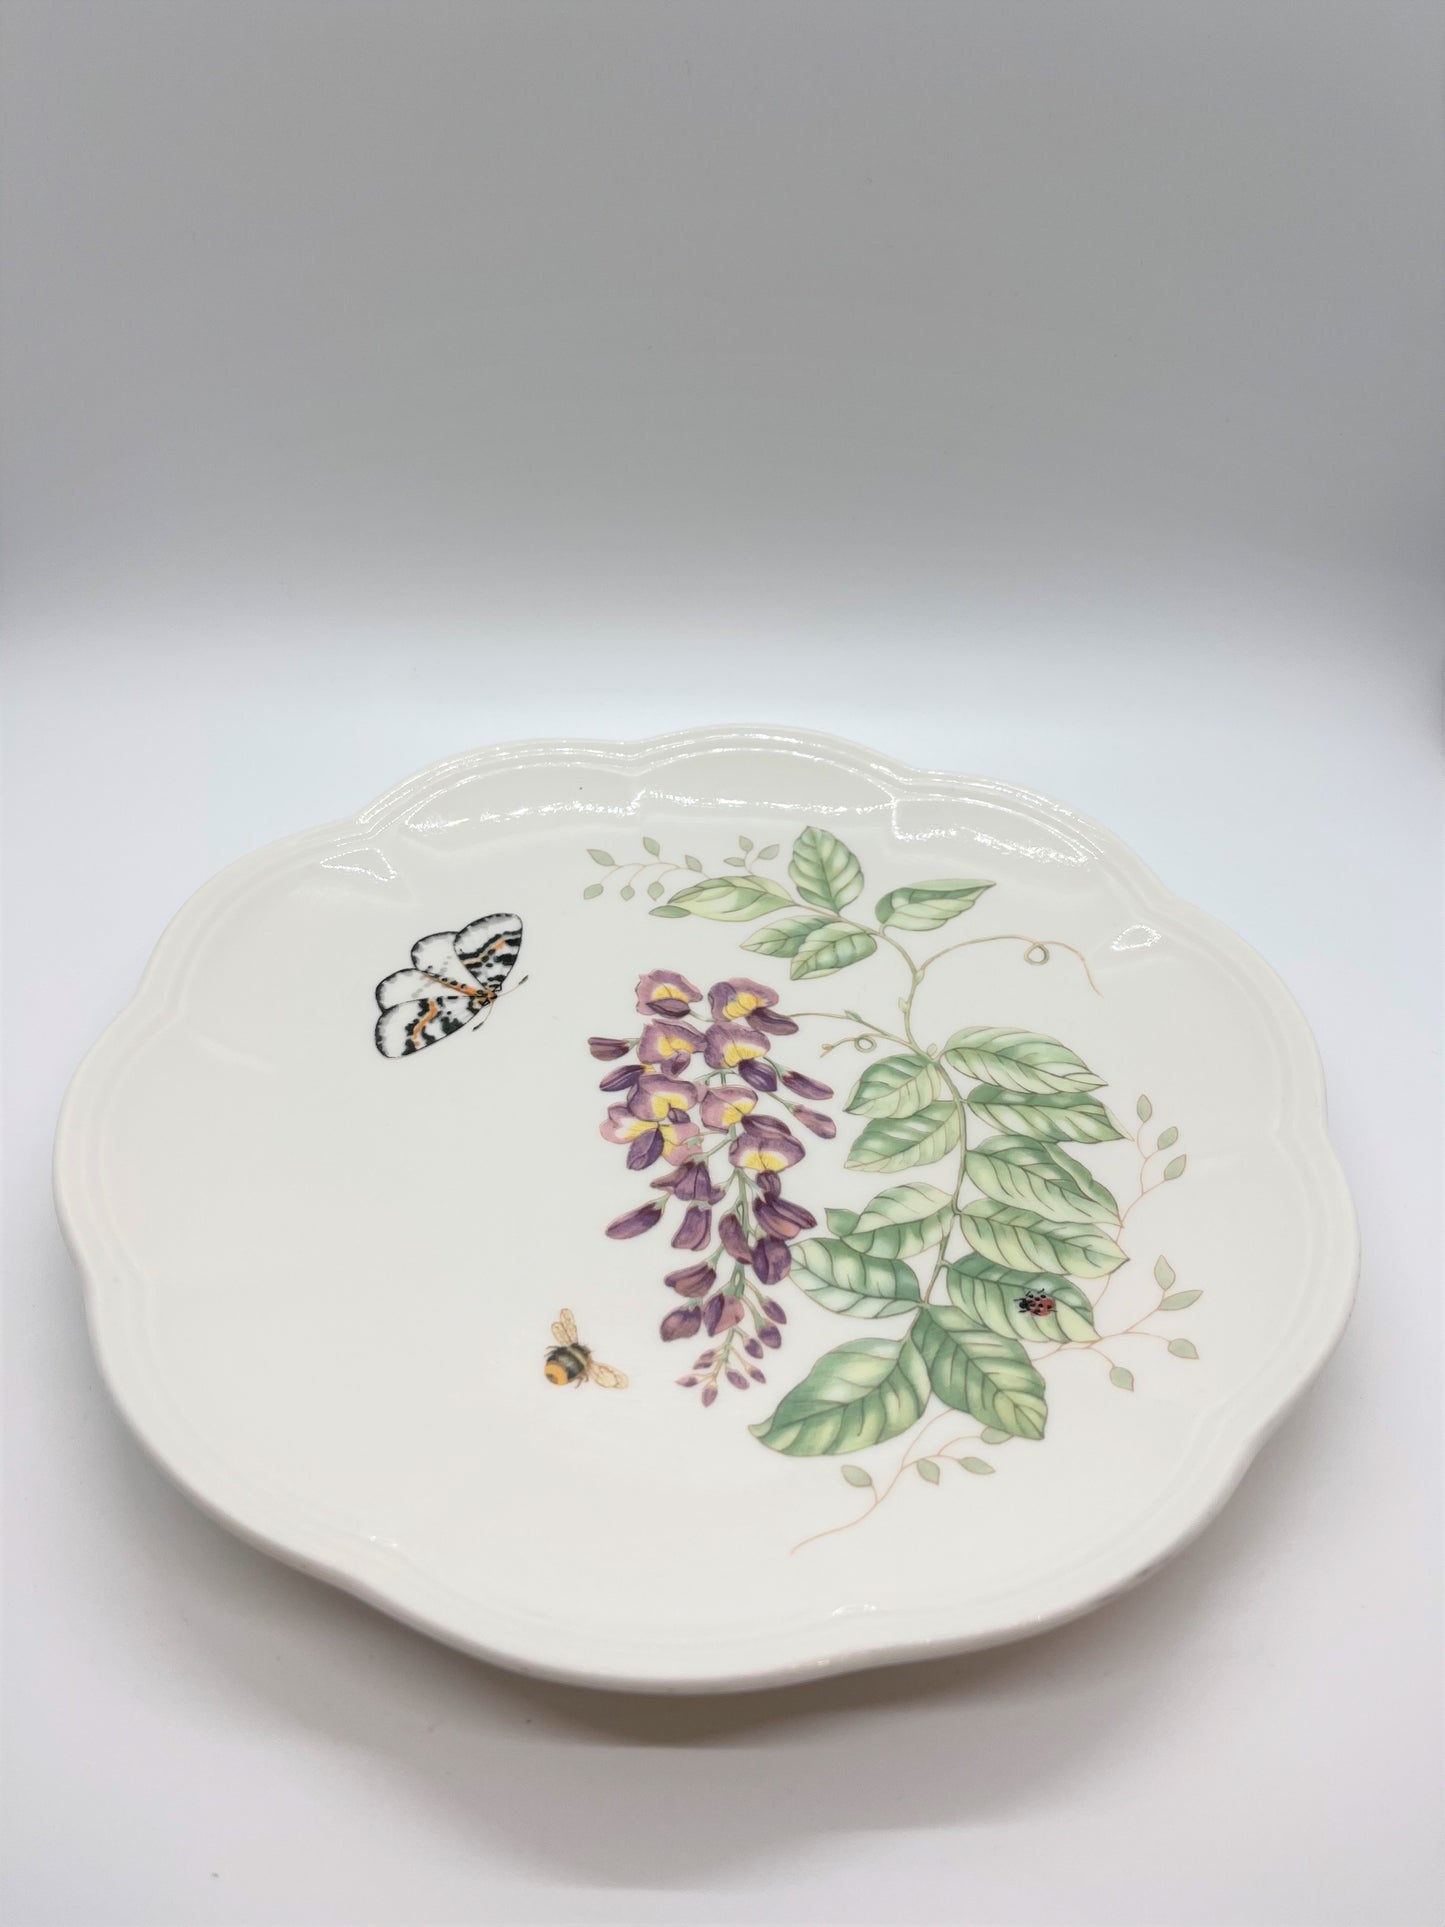 Lenox Butterfly Meadows Plate - Eastern Tailed Blue - Wisteria